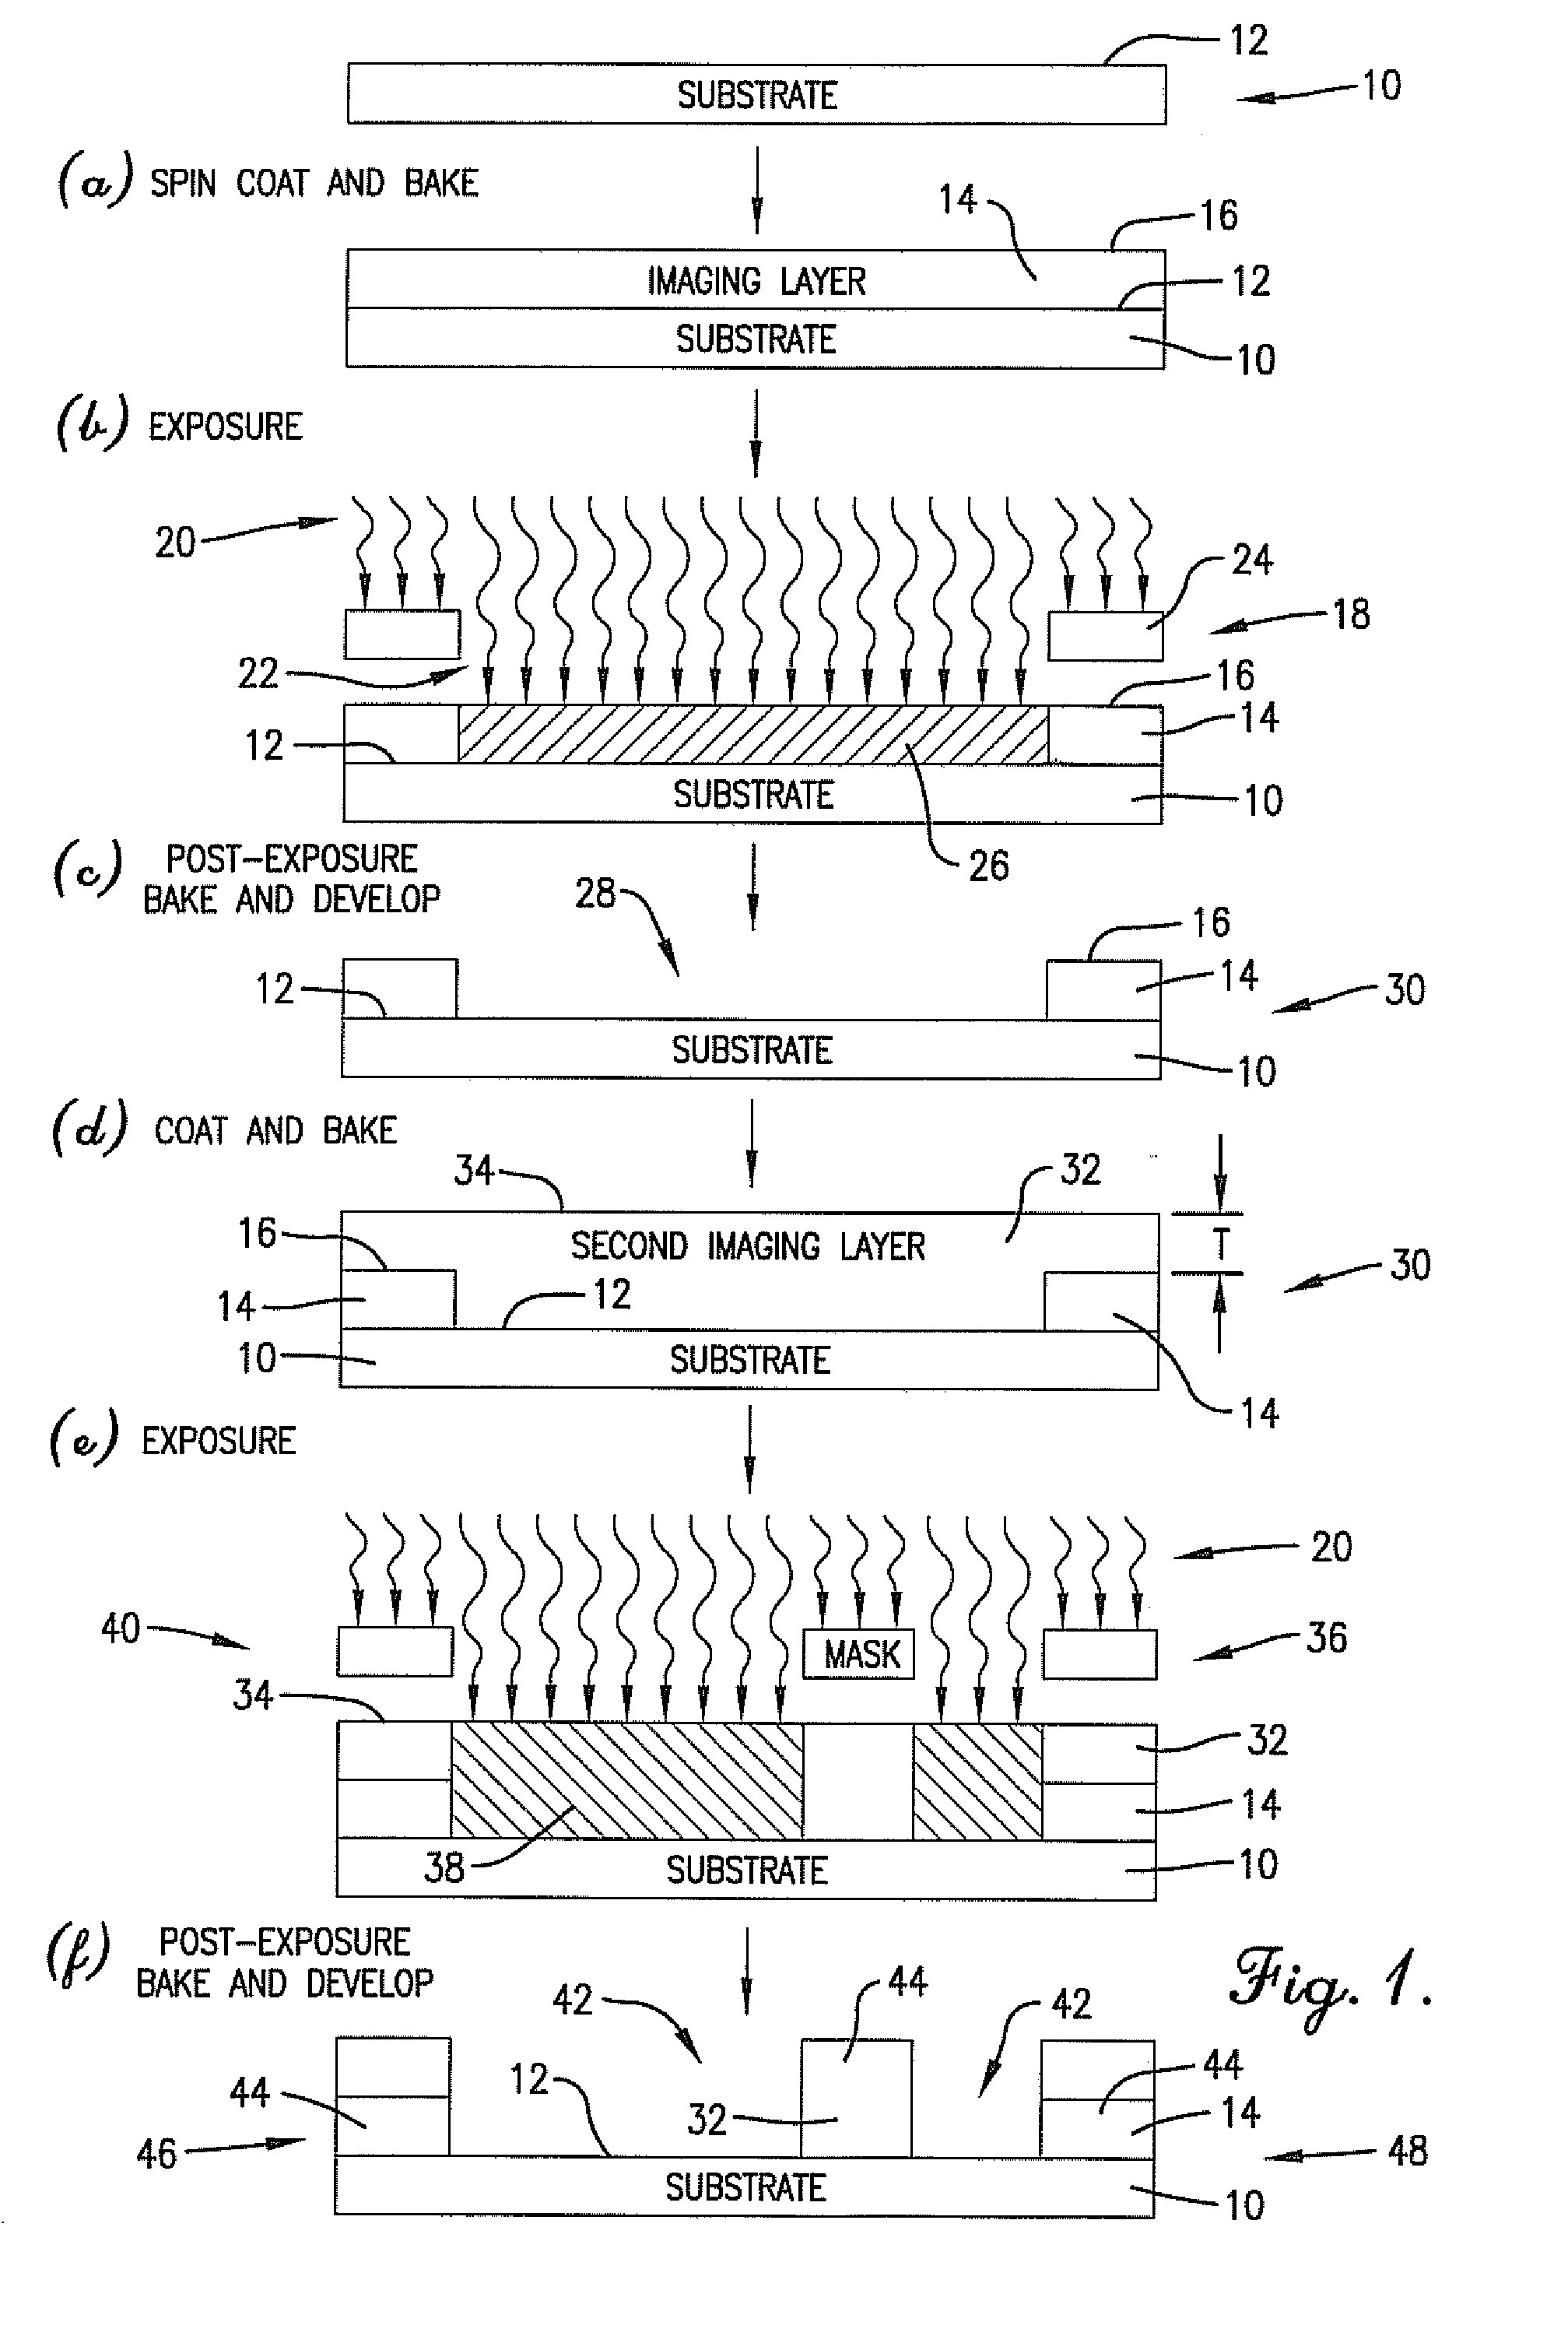 Anti-reflective imaging layer for multiple patterning process